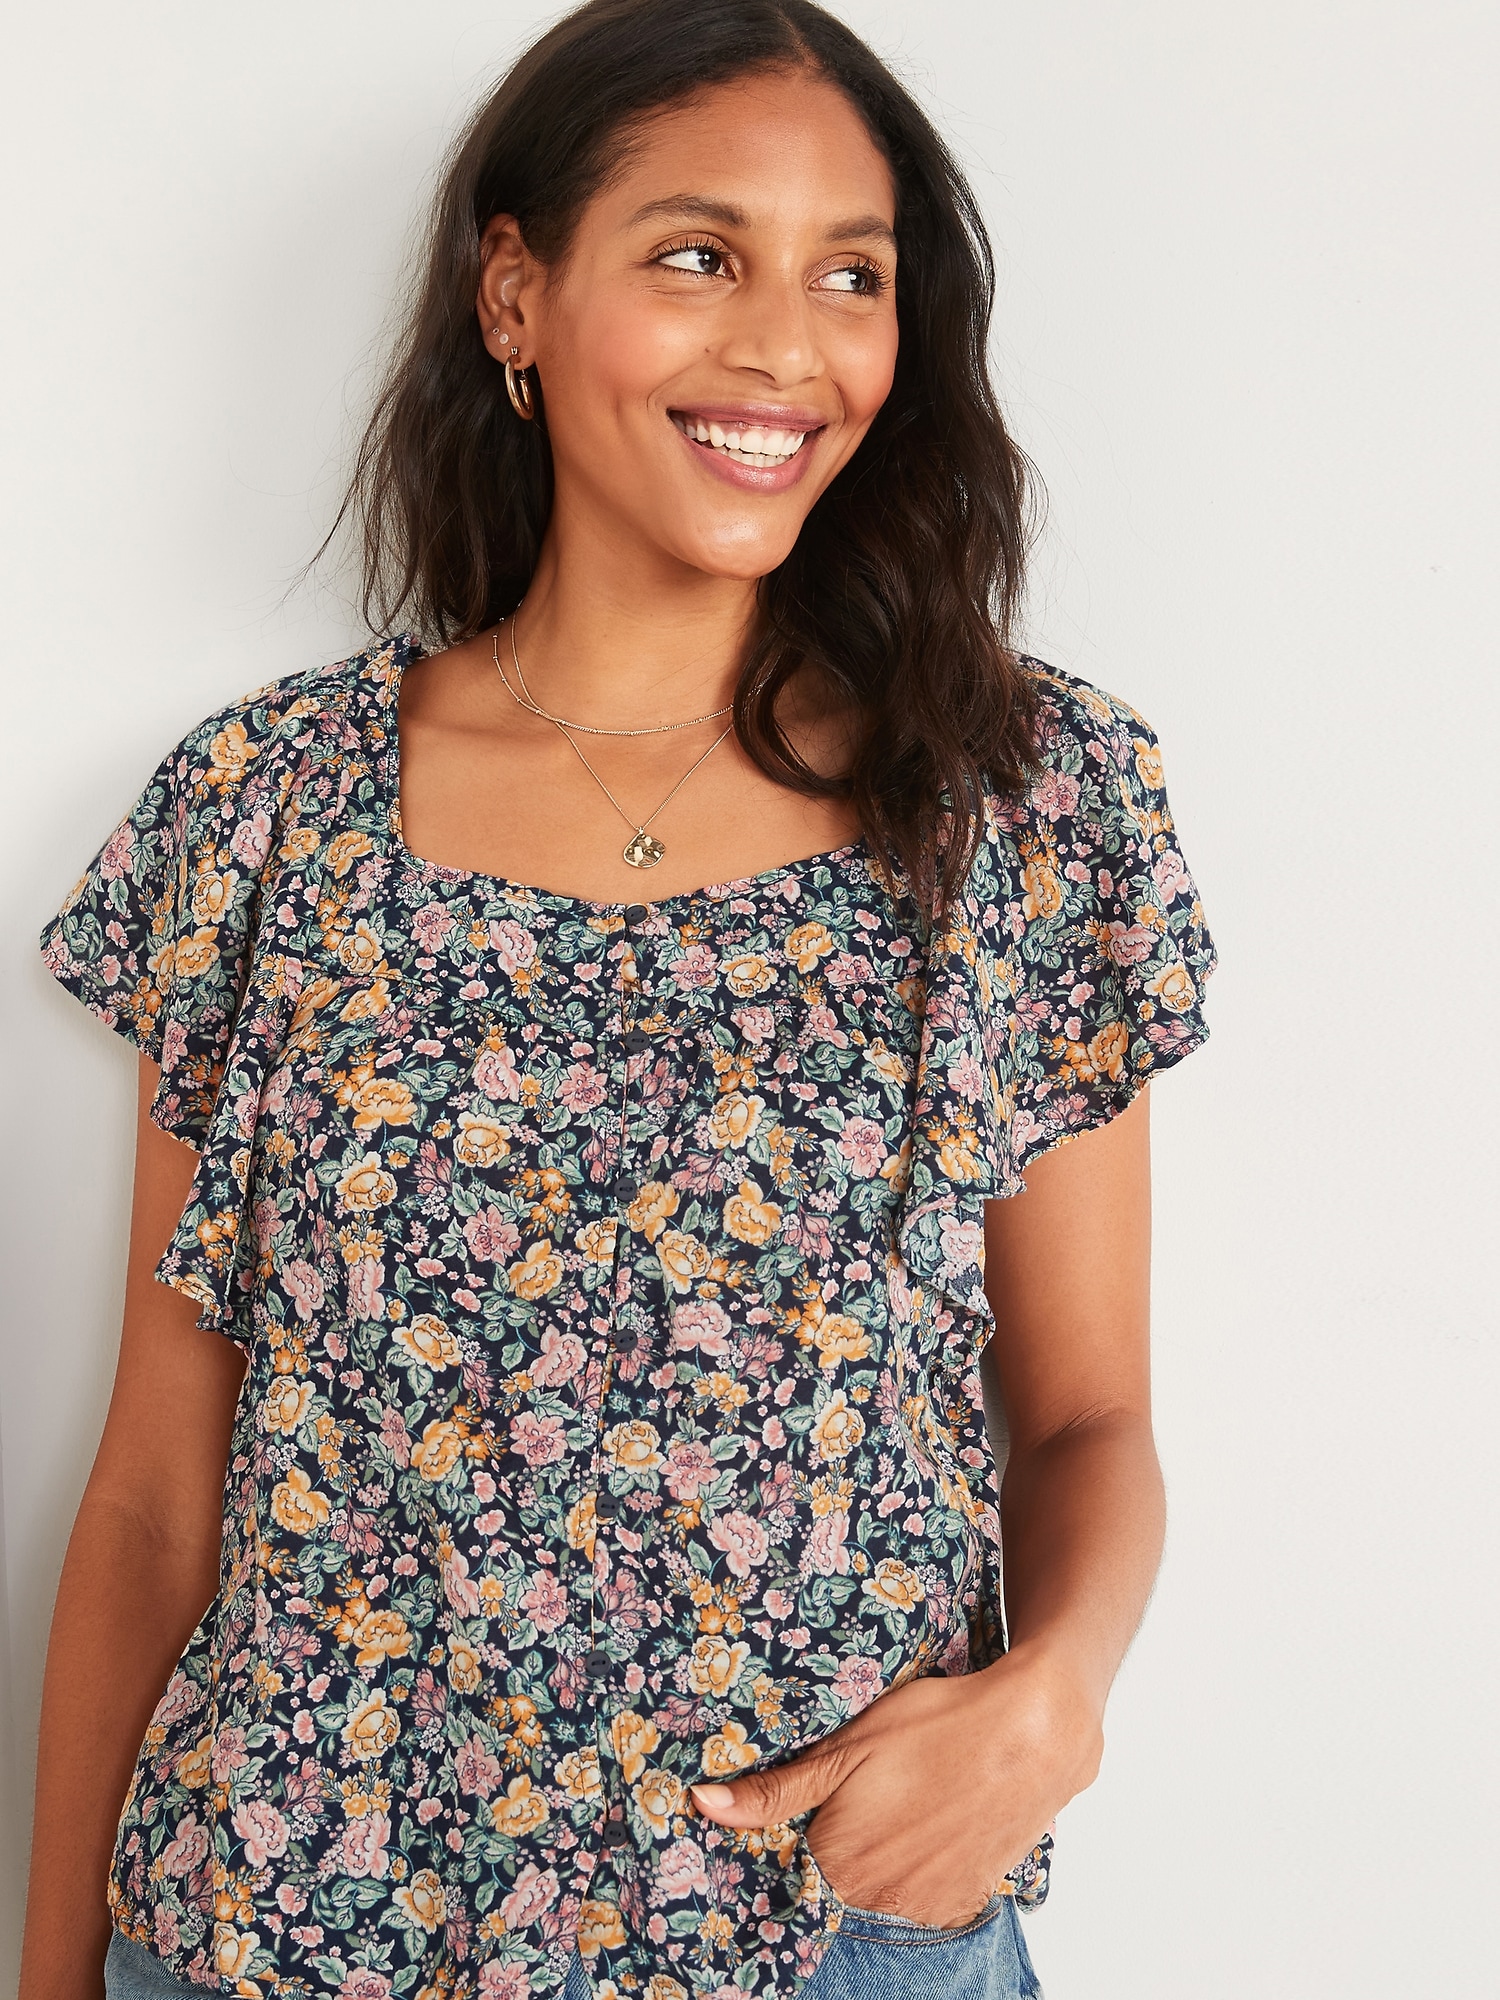 Stylish Navy Floral Square Neck Top